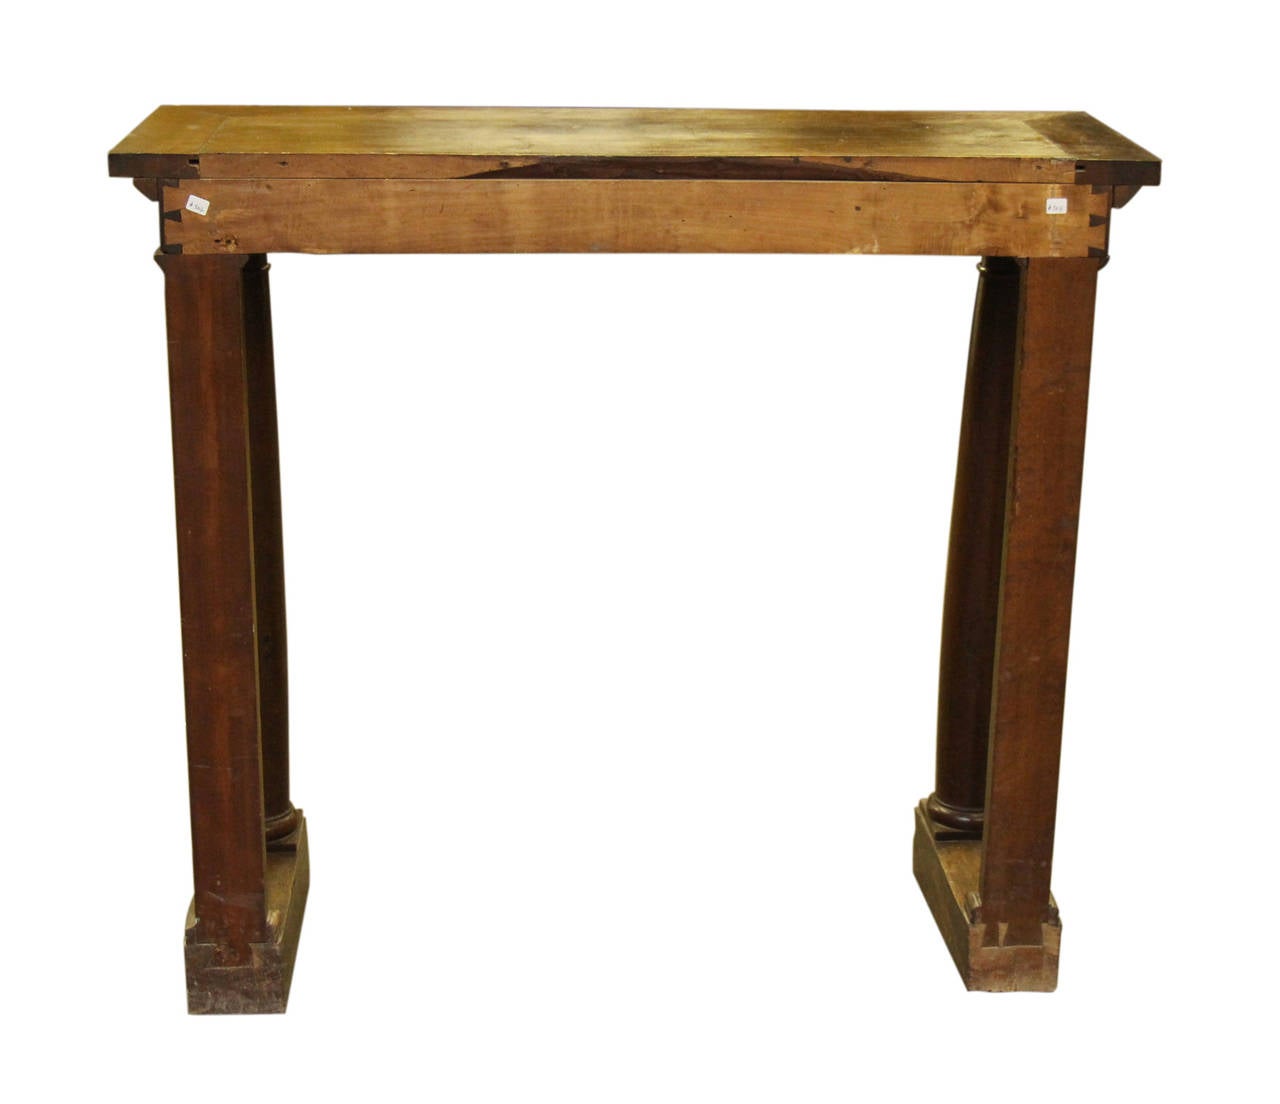 1920s French wood writing console with columns Meant to stand next to a wall with a comfortable writing height.
This item can be viewed at our 302 Bowery location in Manhattan.